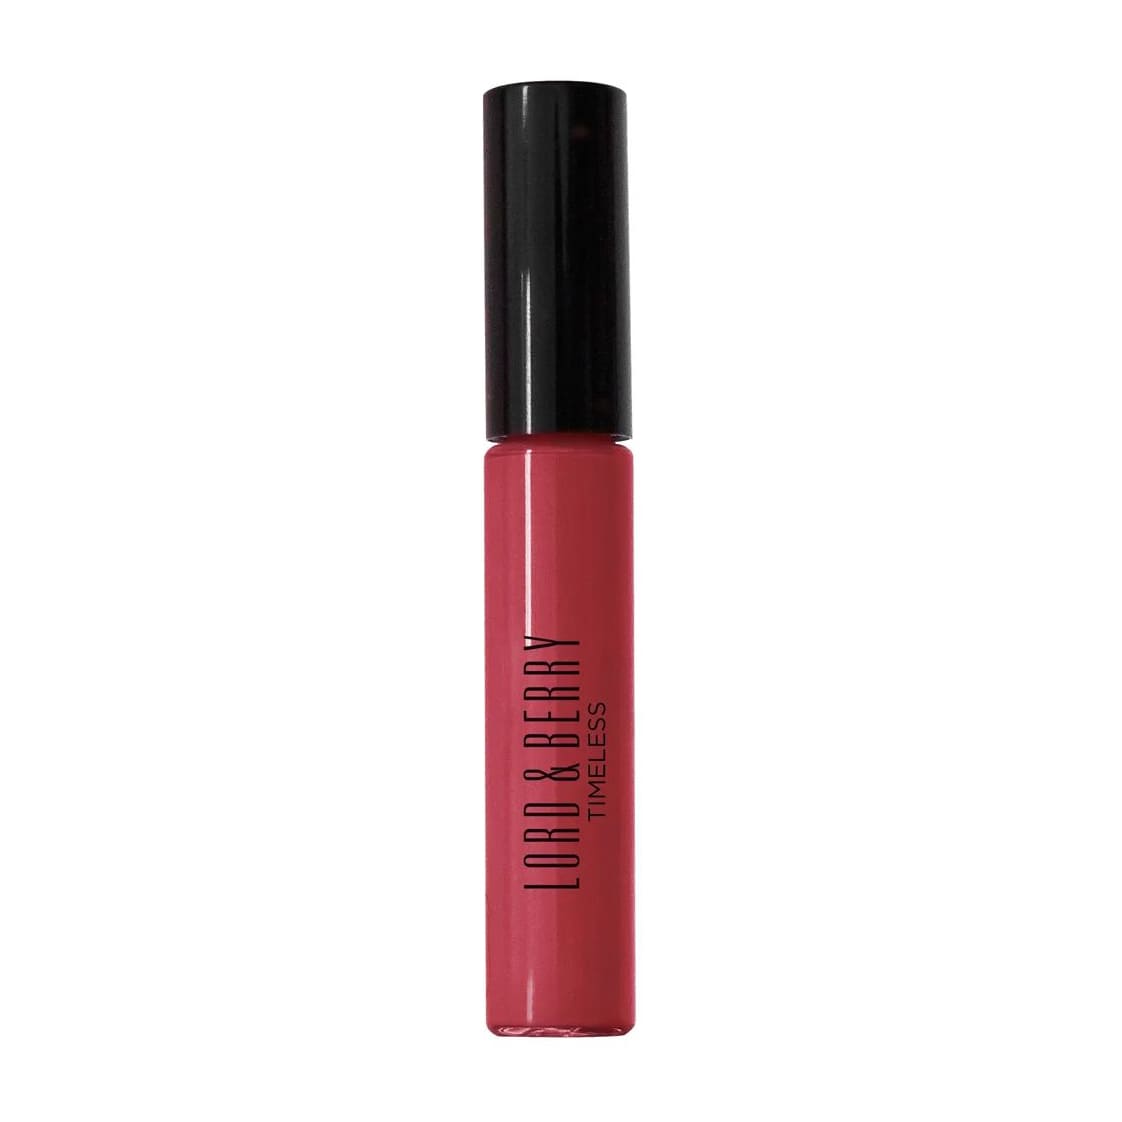 Lord & Berry Timeless Kissproof Lipstick - Bloom Pharmacy